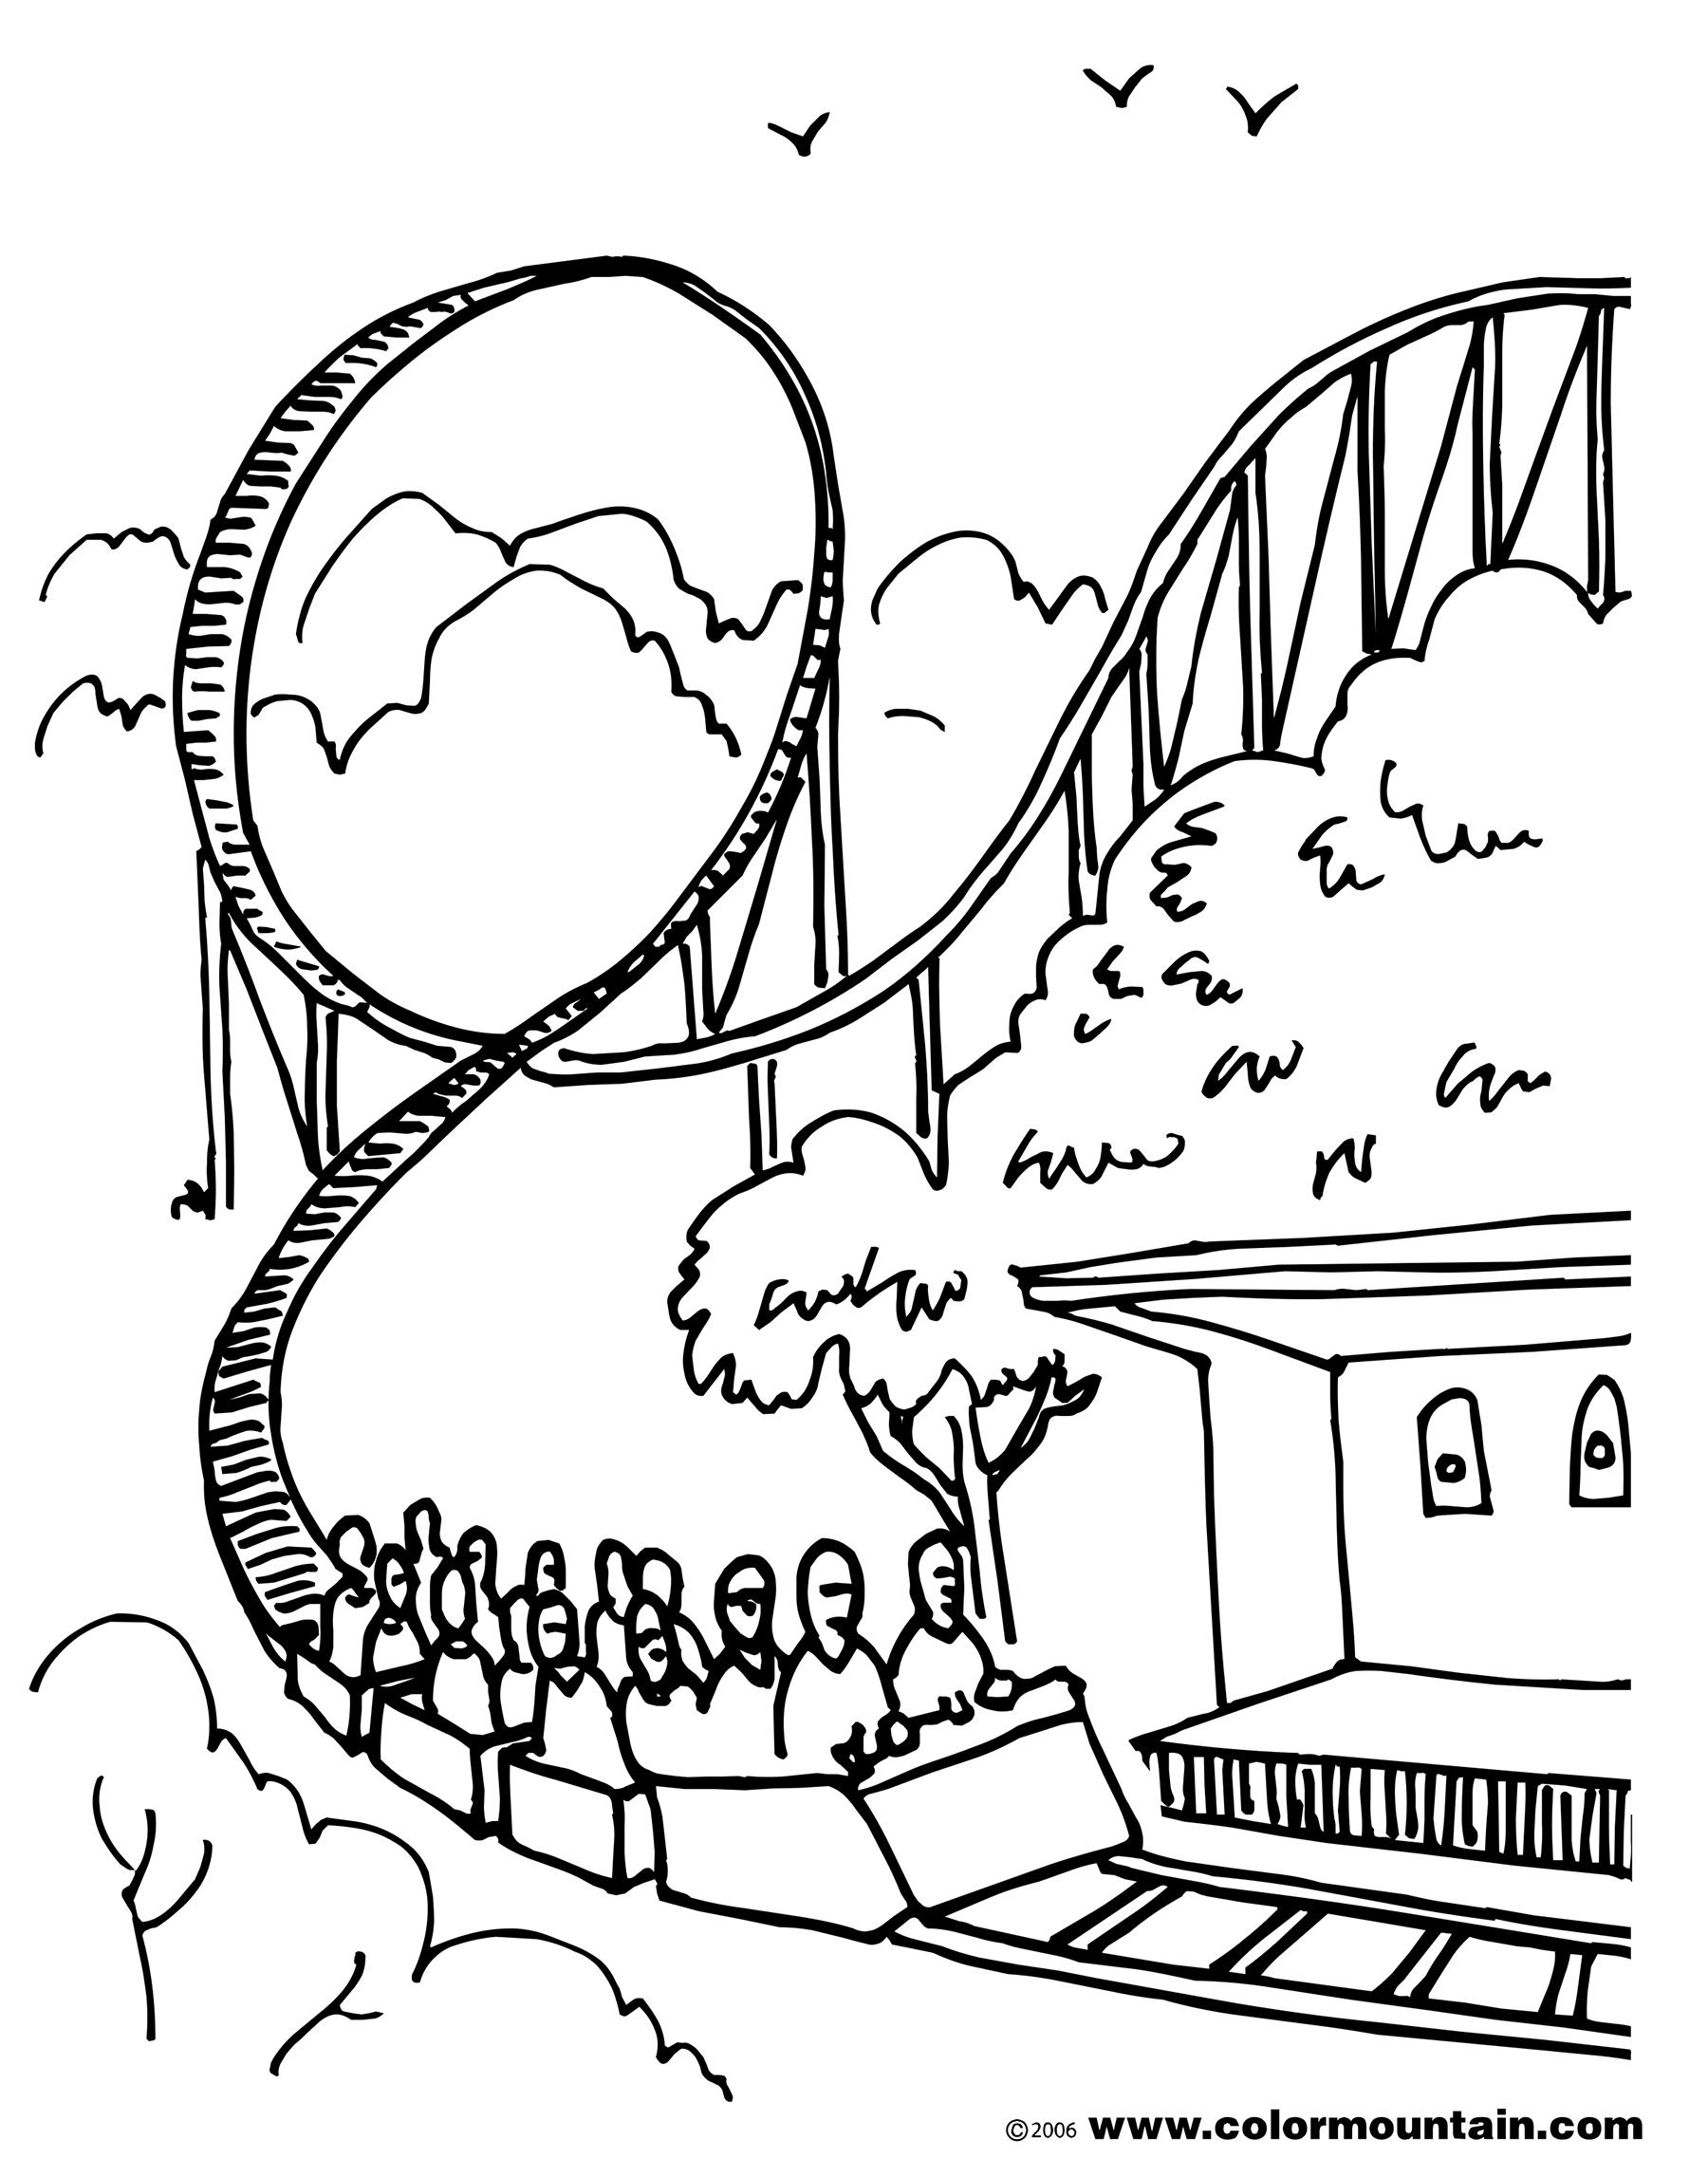 roller coaster coloring sheet coloring page | Roller coaster ...